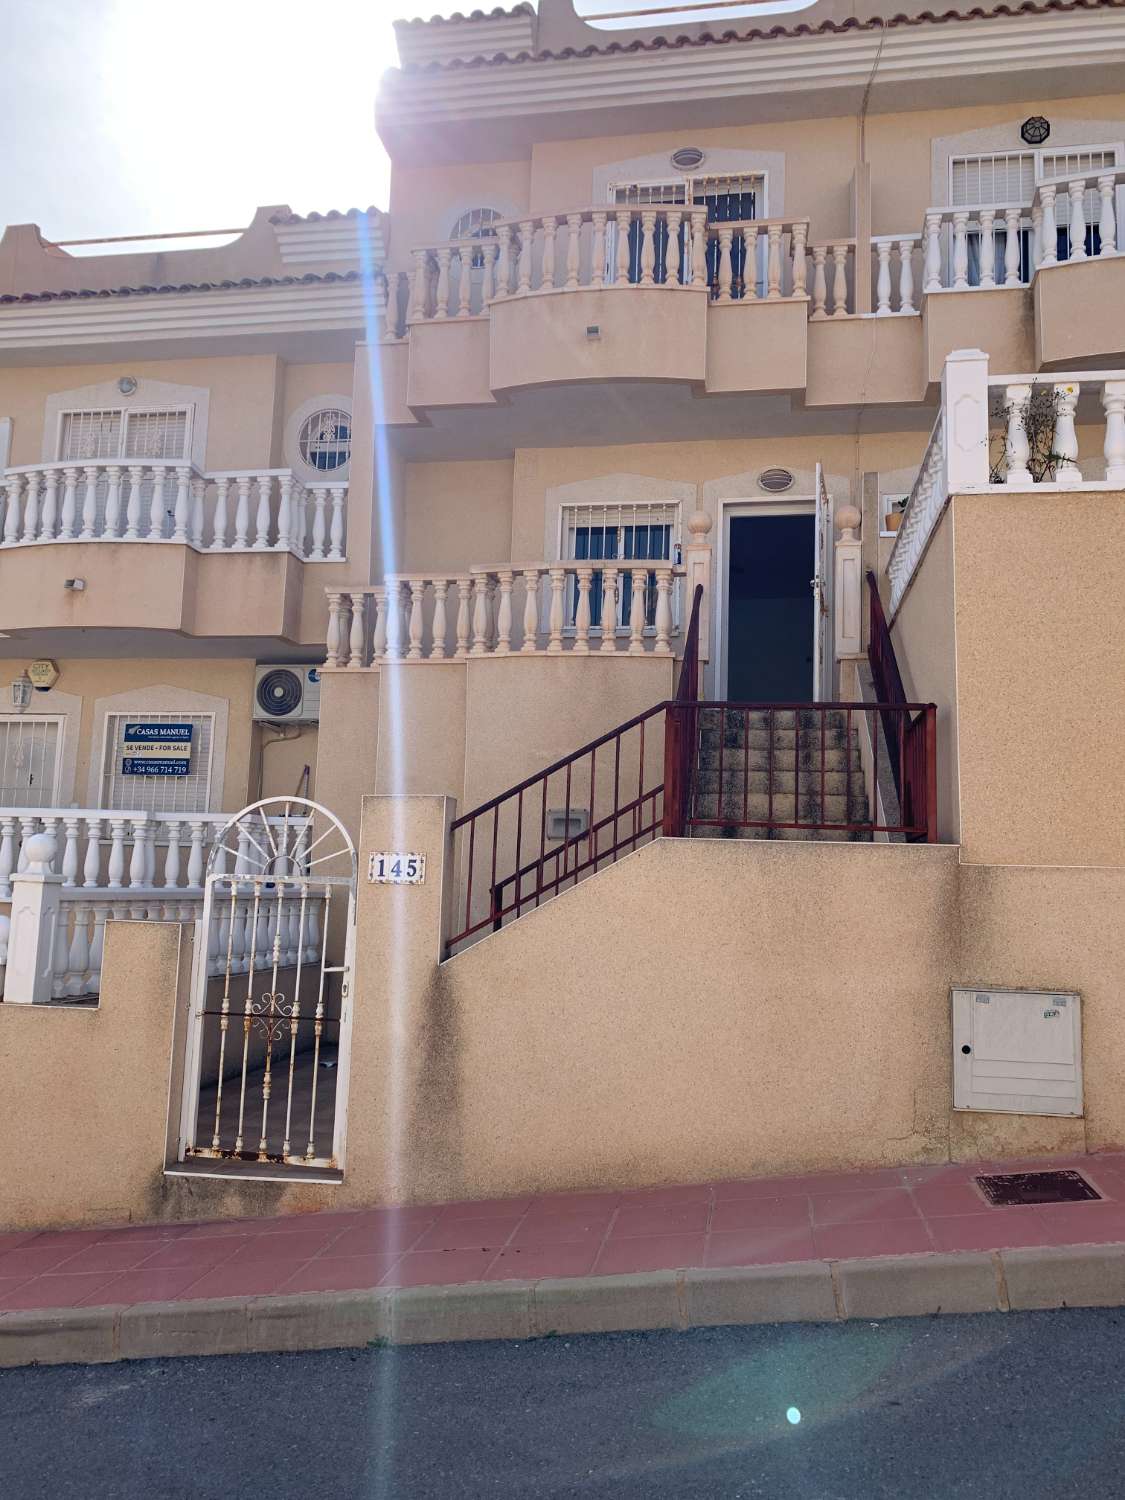 MAKE YOUR OFFER!! 2 BEDROOM DUPLEX HOUSE WITH SOLARIUM AND POOL!!